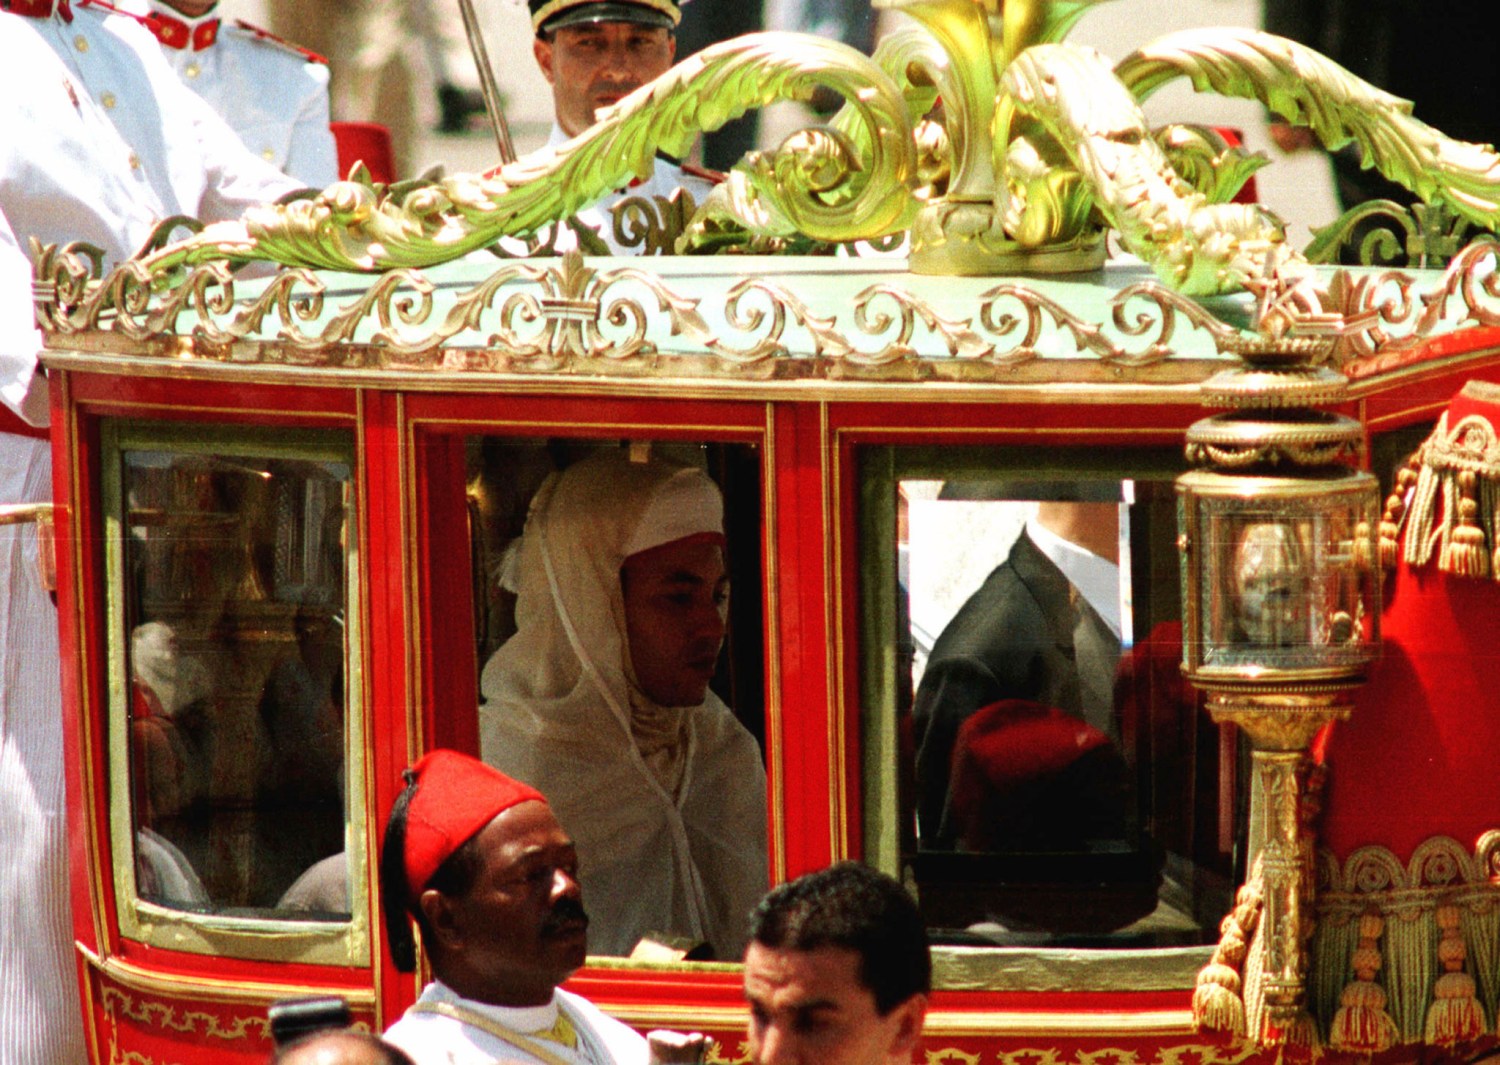 Morocco's new King Mohammed VI sits in a horse-drawn red carriage, on his way to preside over his first Moslem prayers at the Ahl Fez Mosque July 30, since taking the throne last week. According to tradition, the first Friday (after being crowned) the king presides over prayers as a symbol that the king is carrying out his role as the Commander of the Faithful.JB/AA